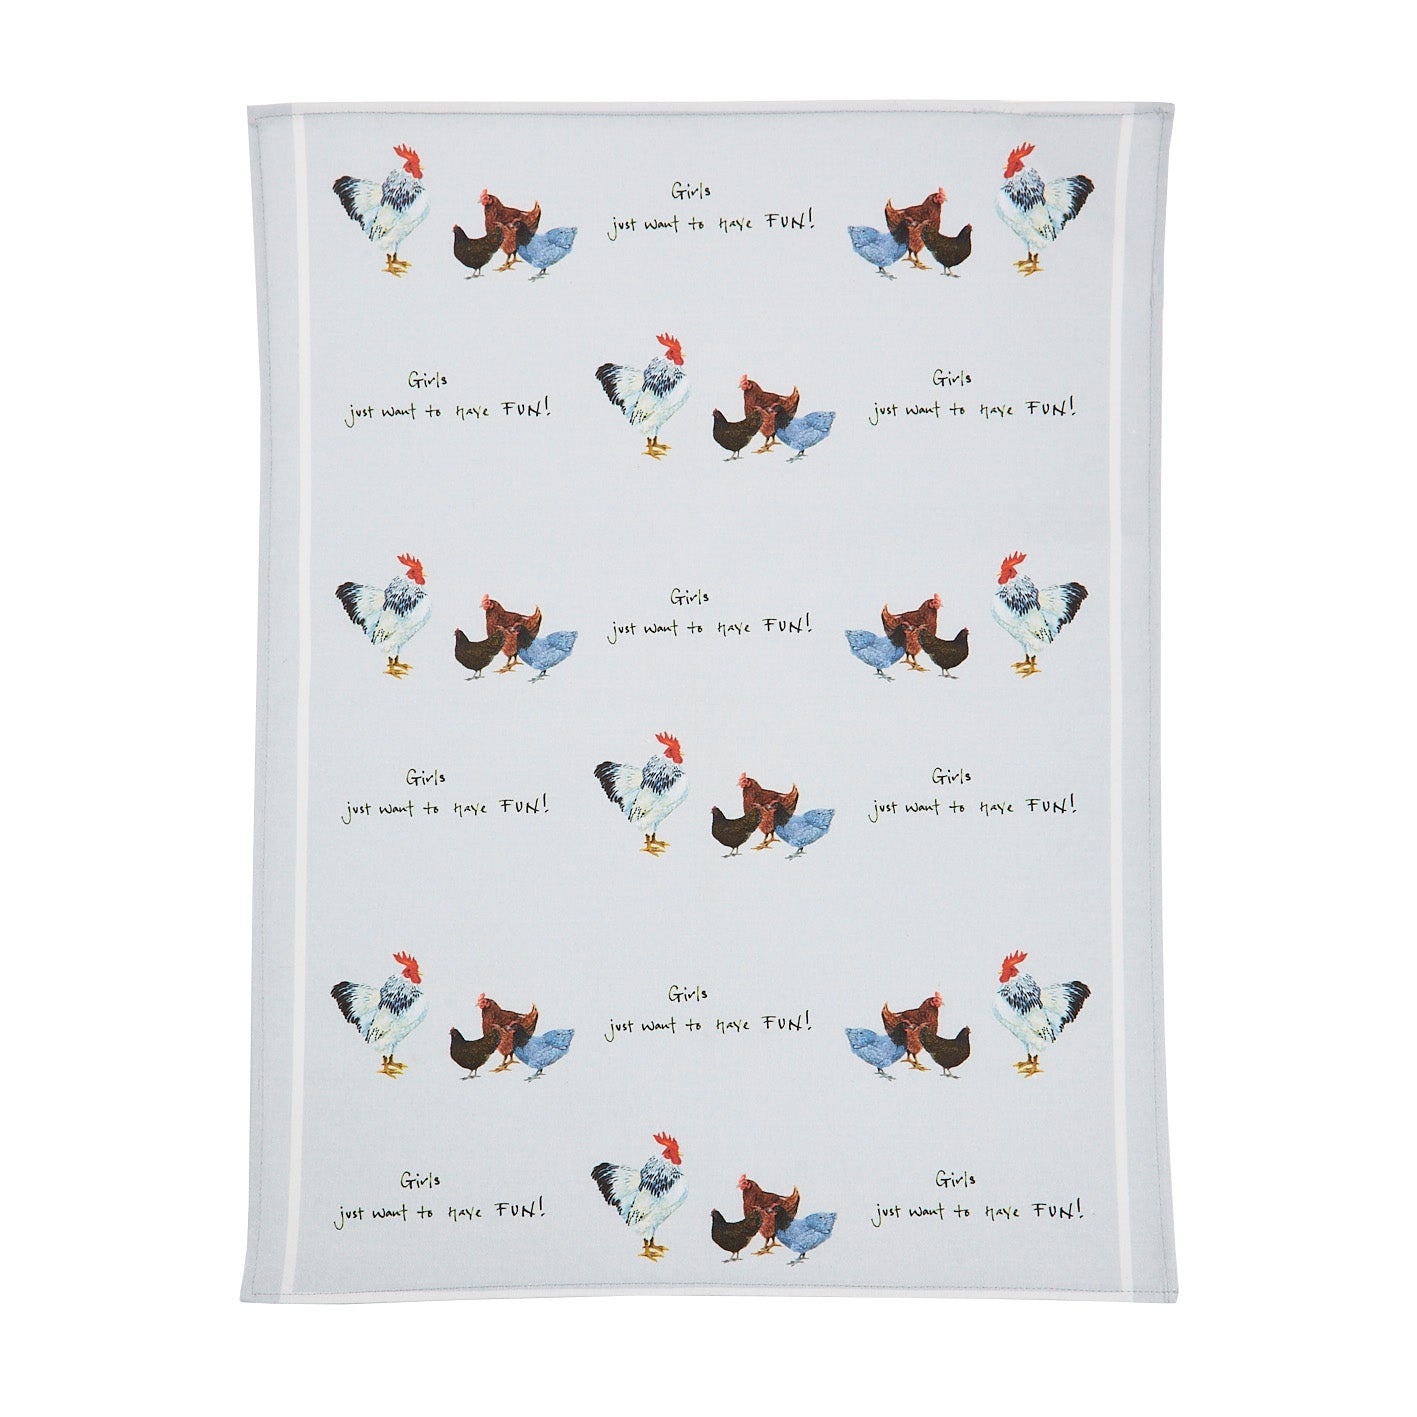 "Girls Just Want to Have Fun!" Tea Towel